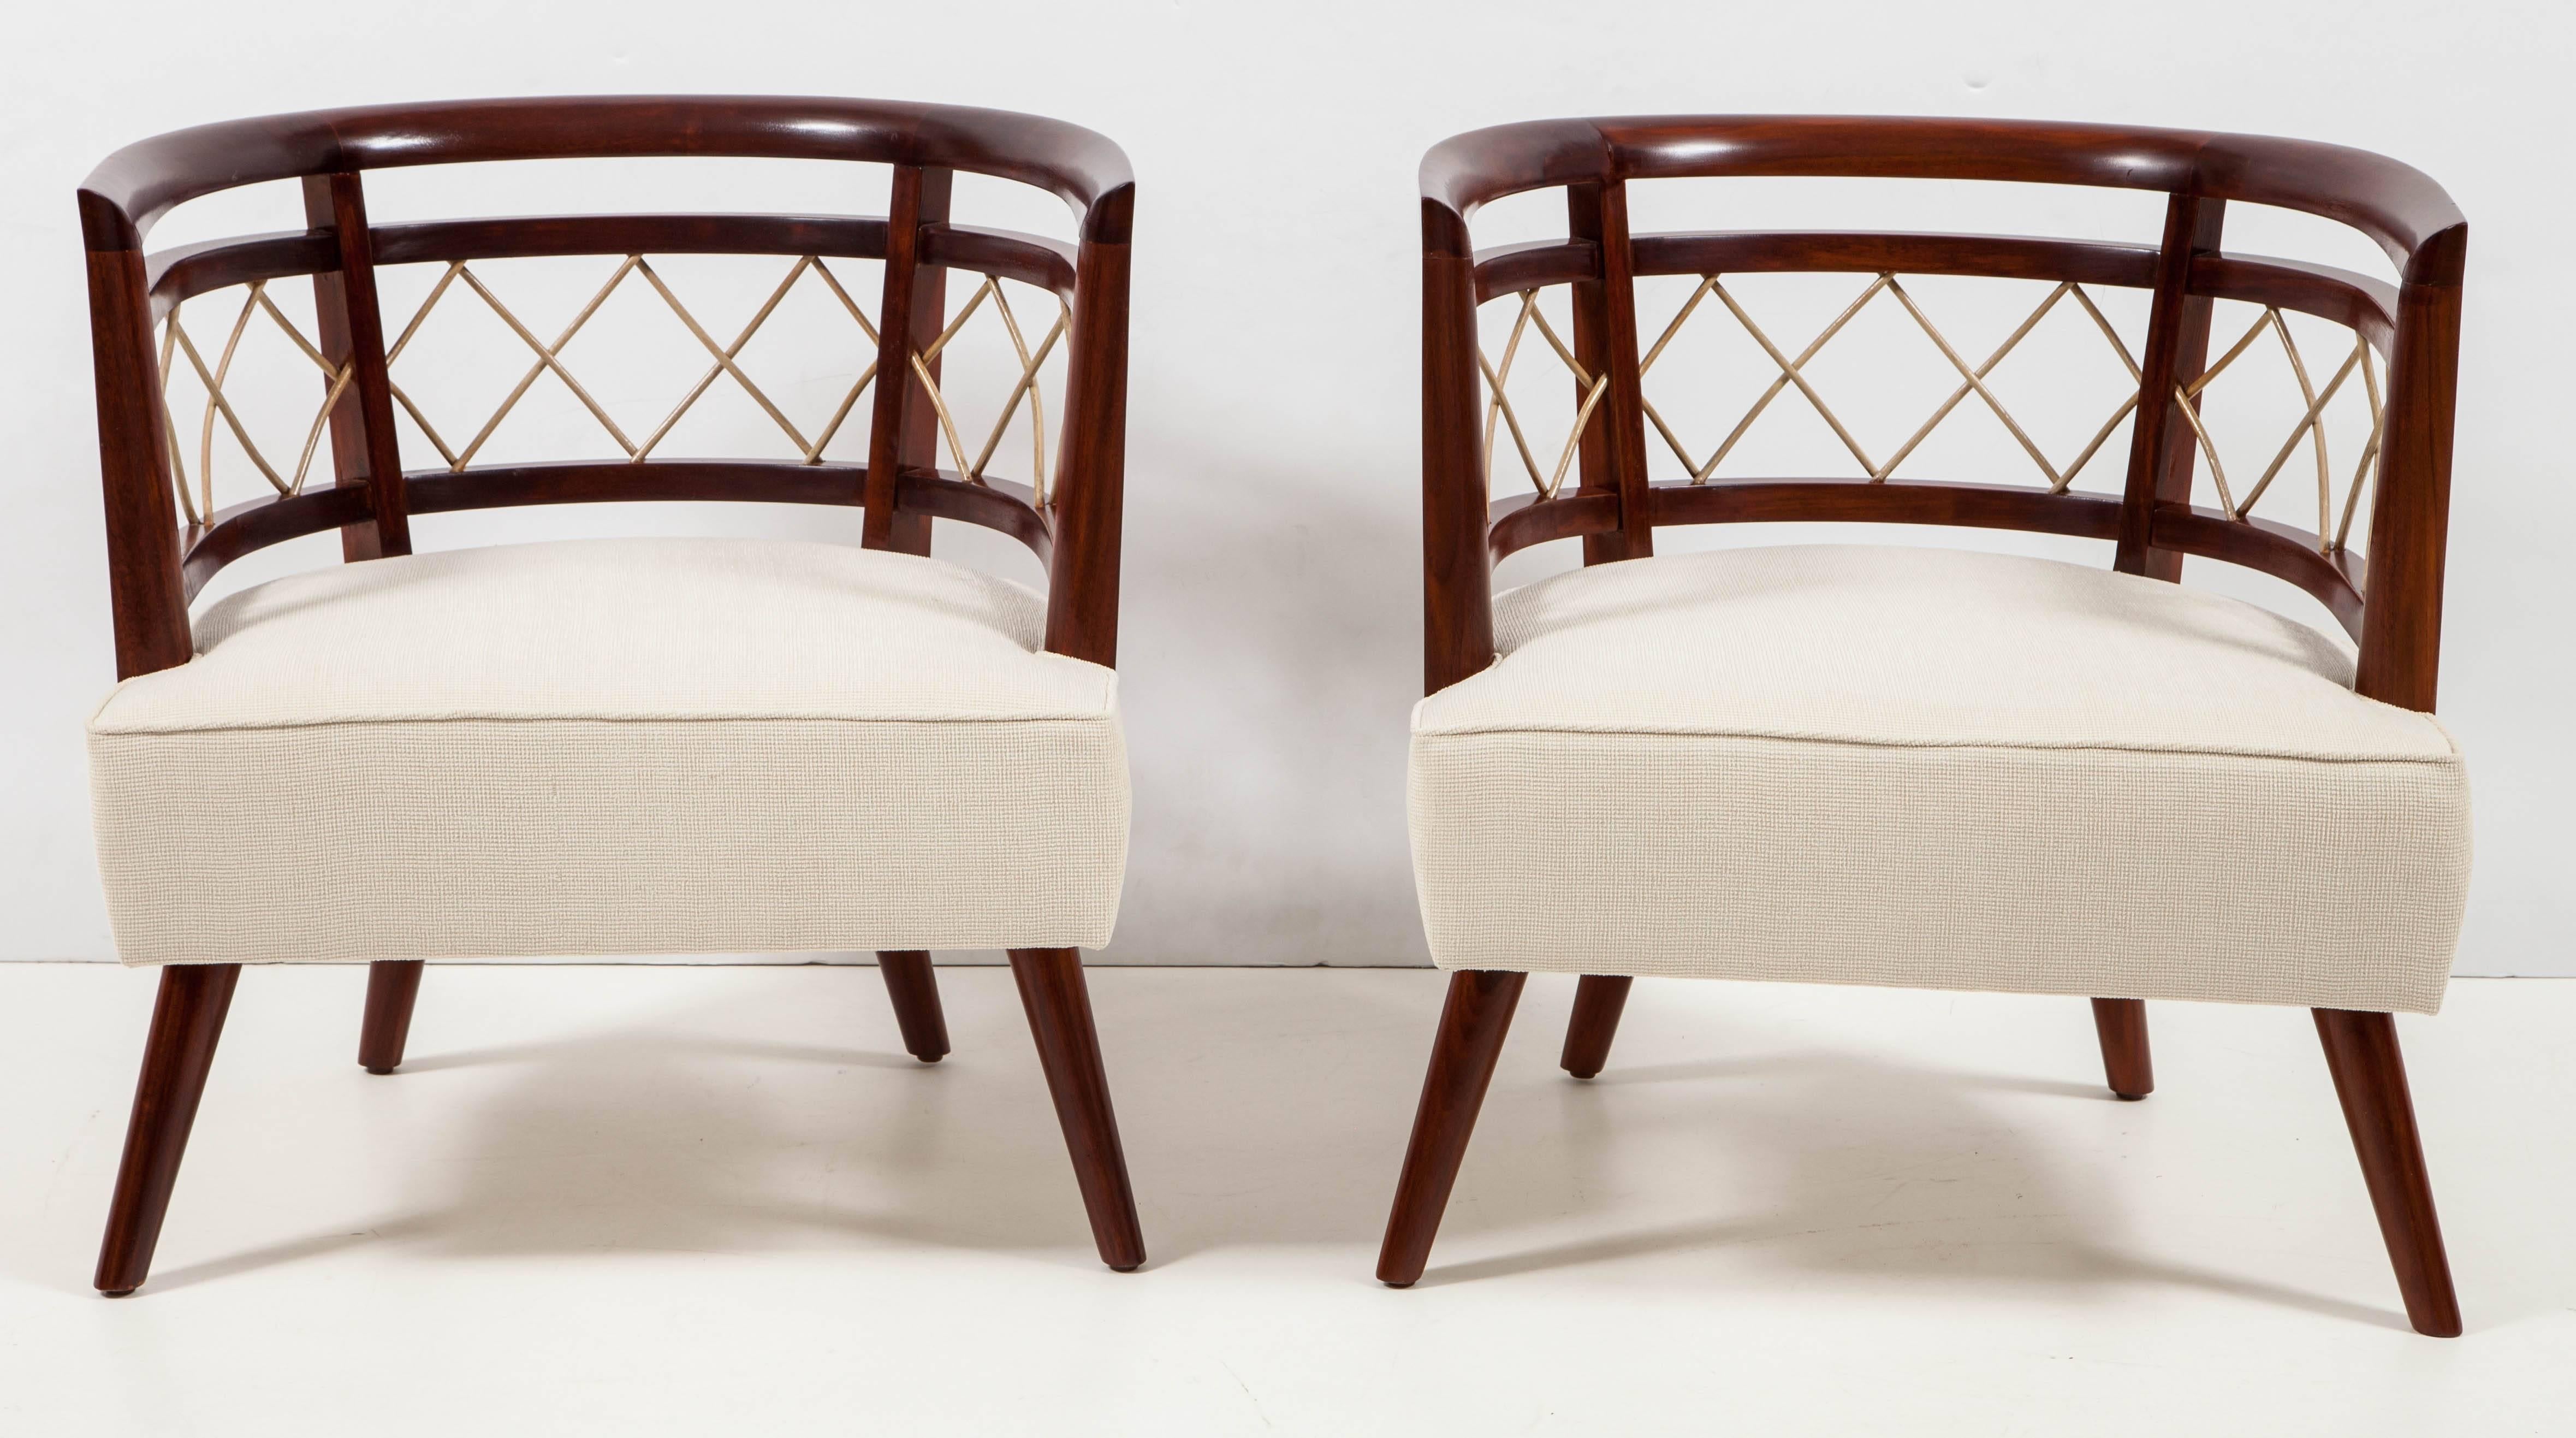 Small-scale 1950s lounge chairs with a strong visual punch. Polished European walnut frames enhances with a grillwork of rattan adding detail to the barrel arms and back. Newly refinished and reupholstered in natural linen bouclé́. 